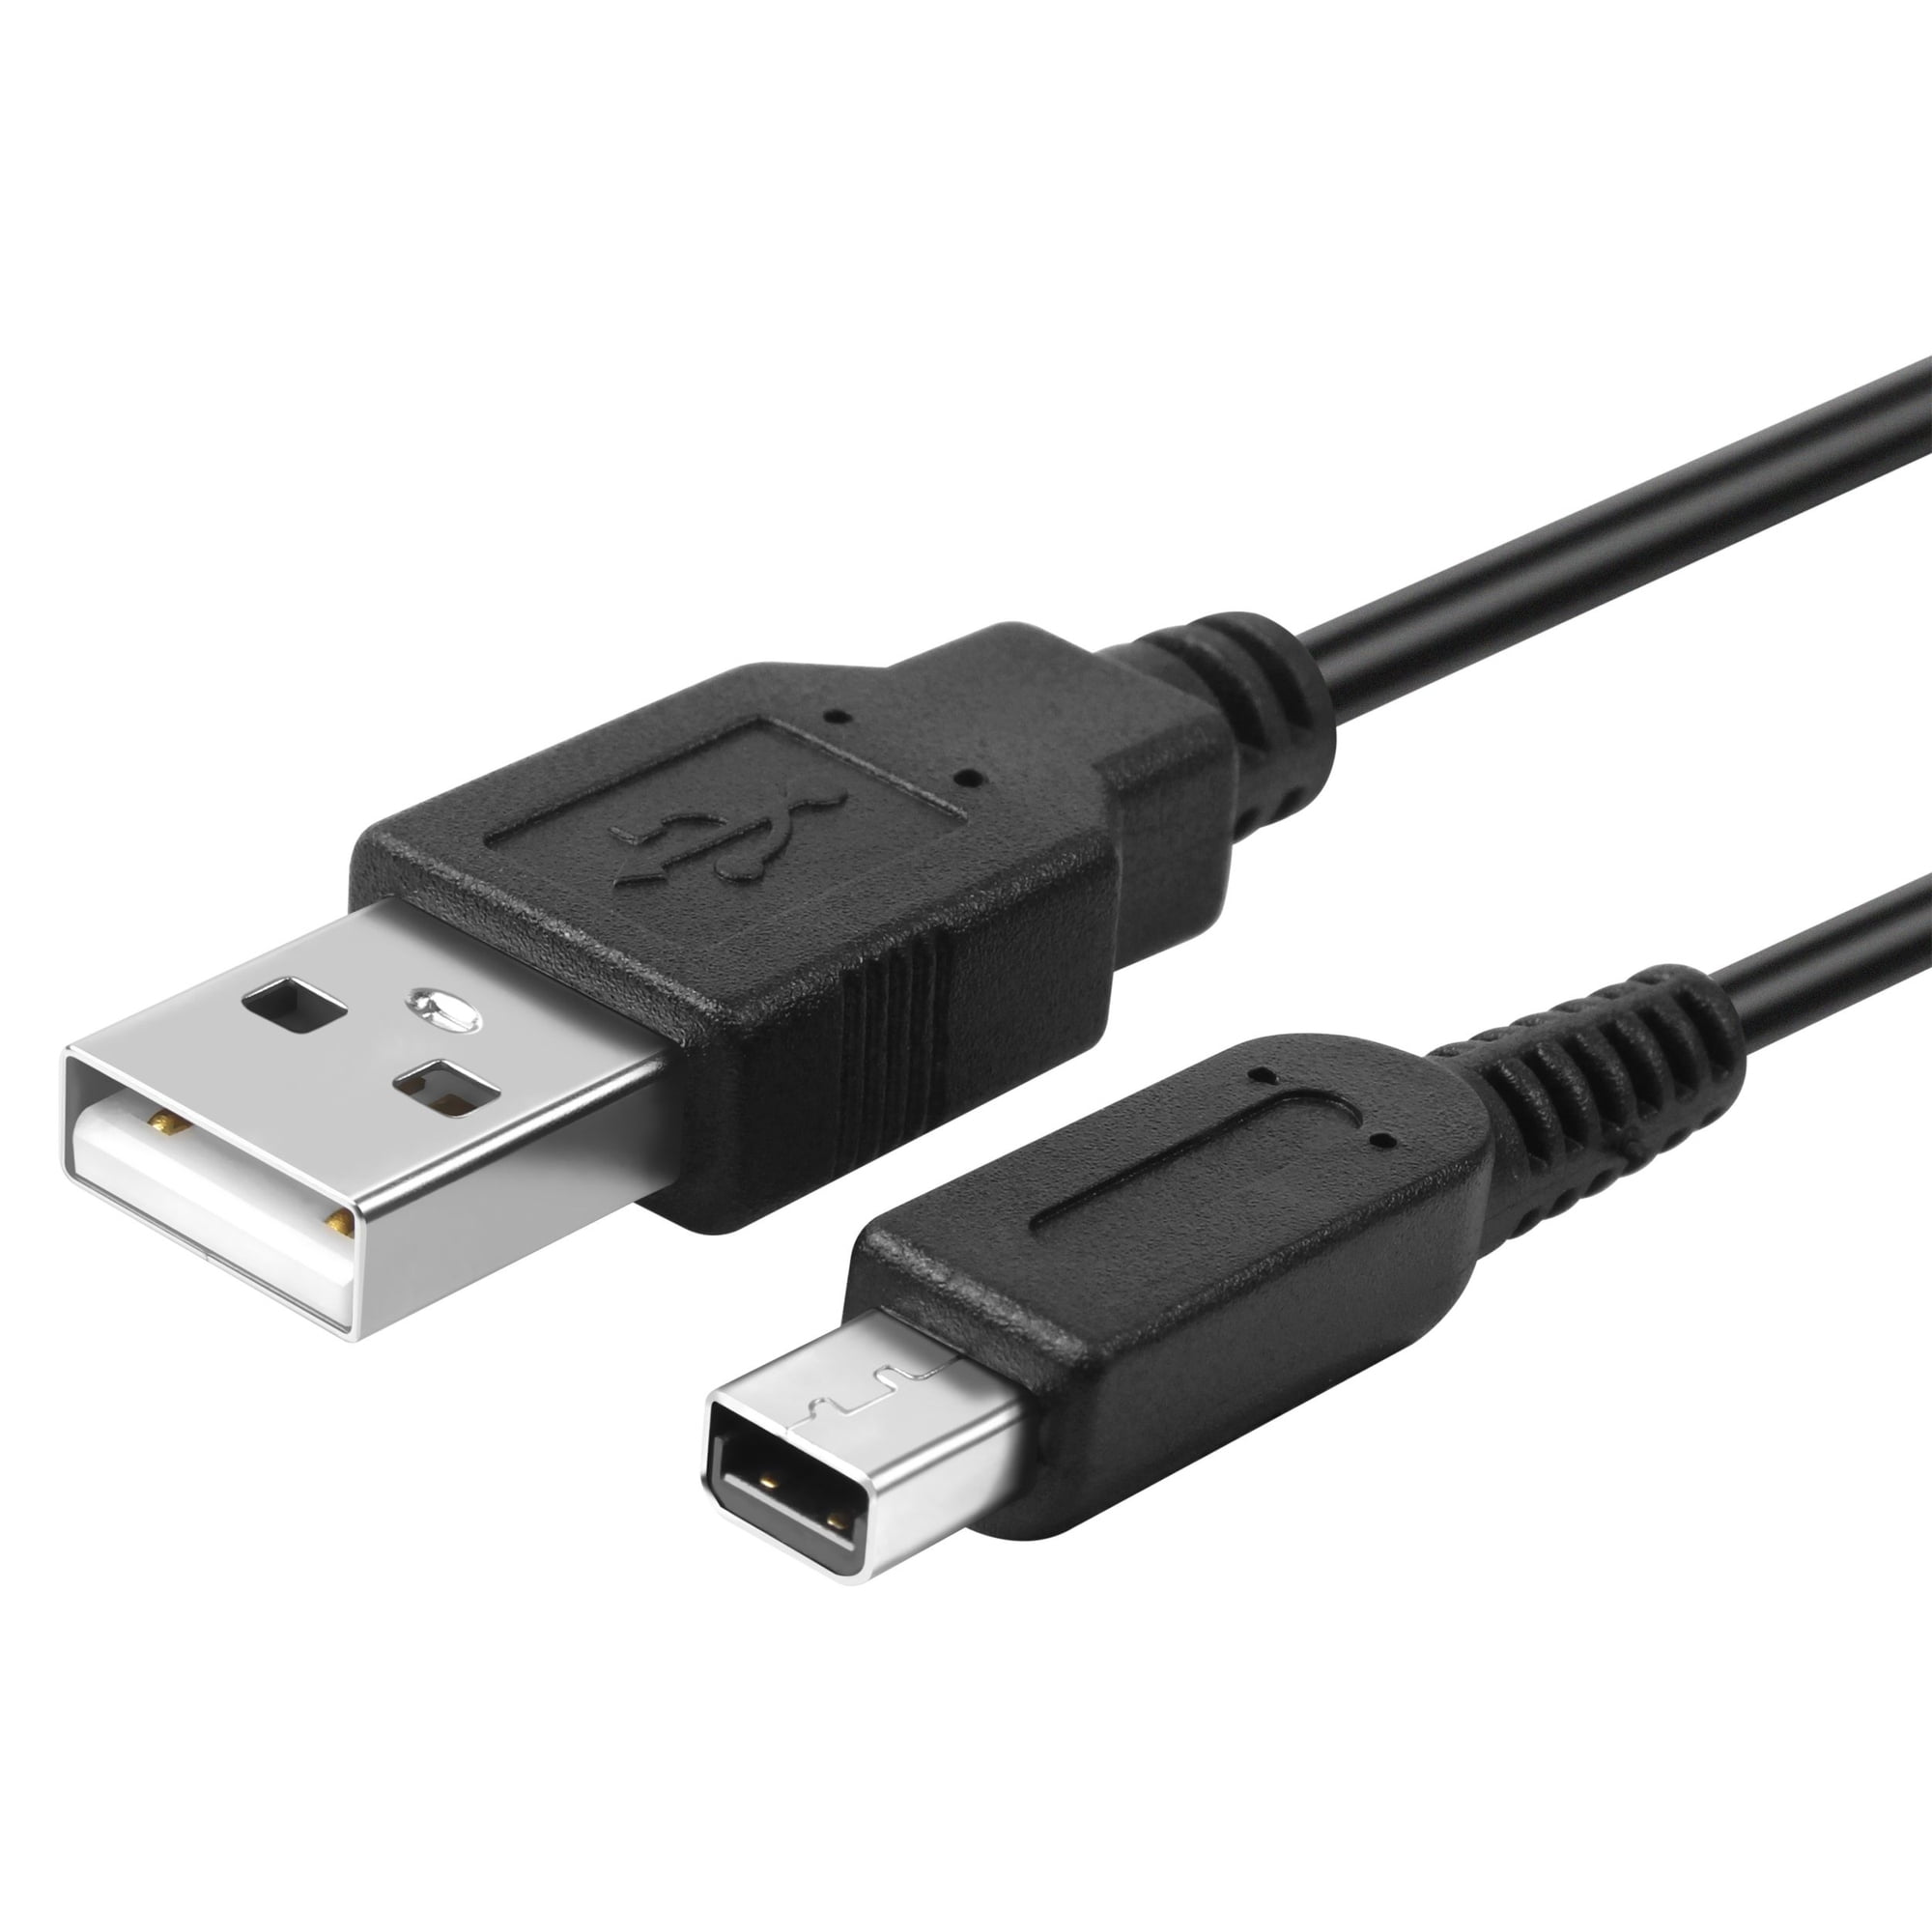 Insten USB Charging Cable for Nintendo DSi LL XL / 2DS 3DS / 3DS LL XL NEW 3DS XL / NEW 2DS XL - Walmart.com